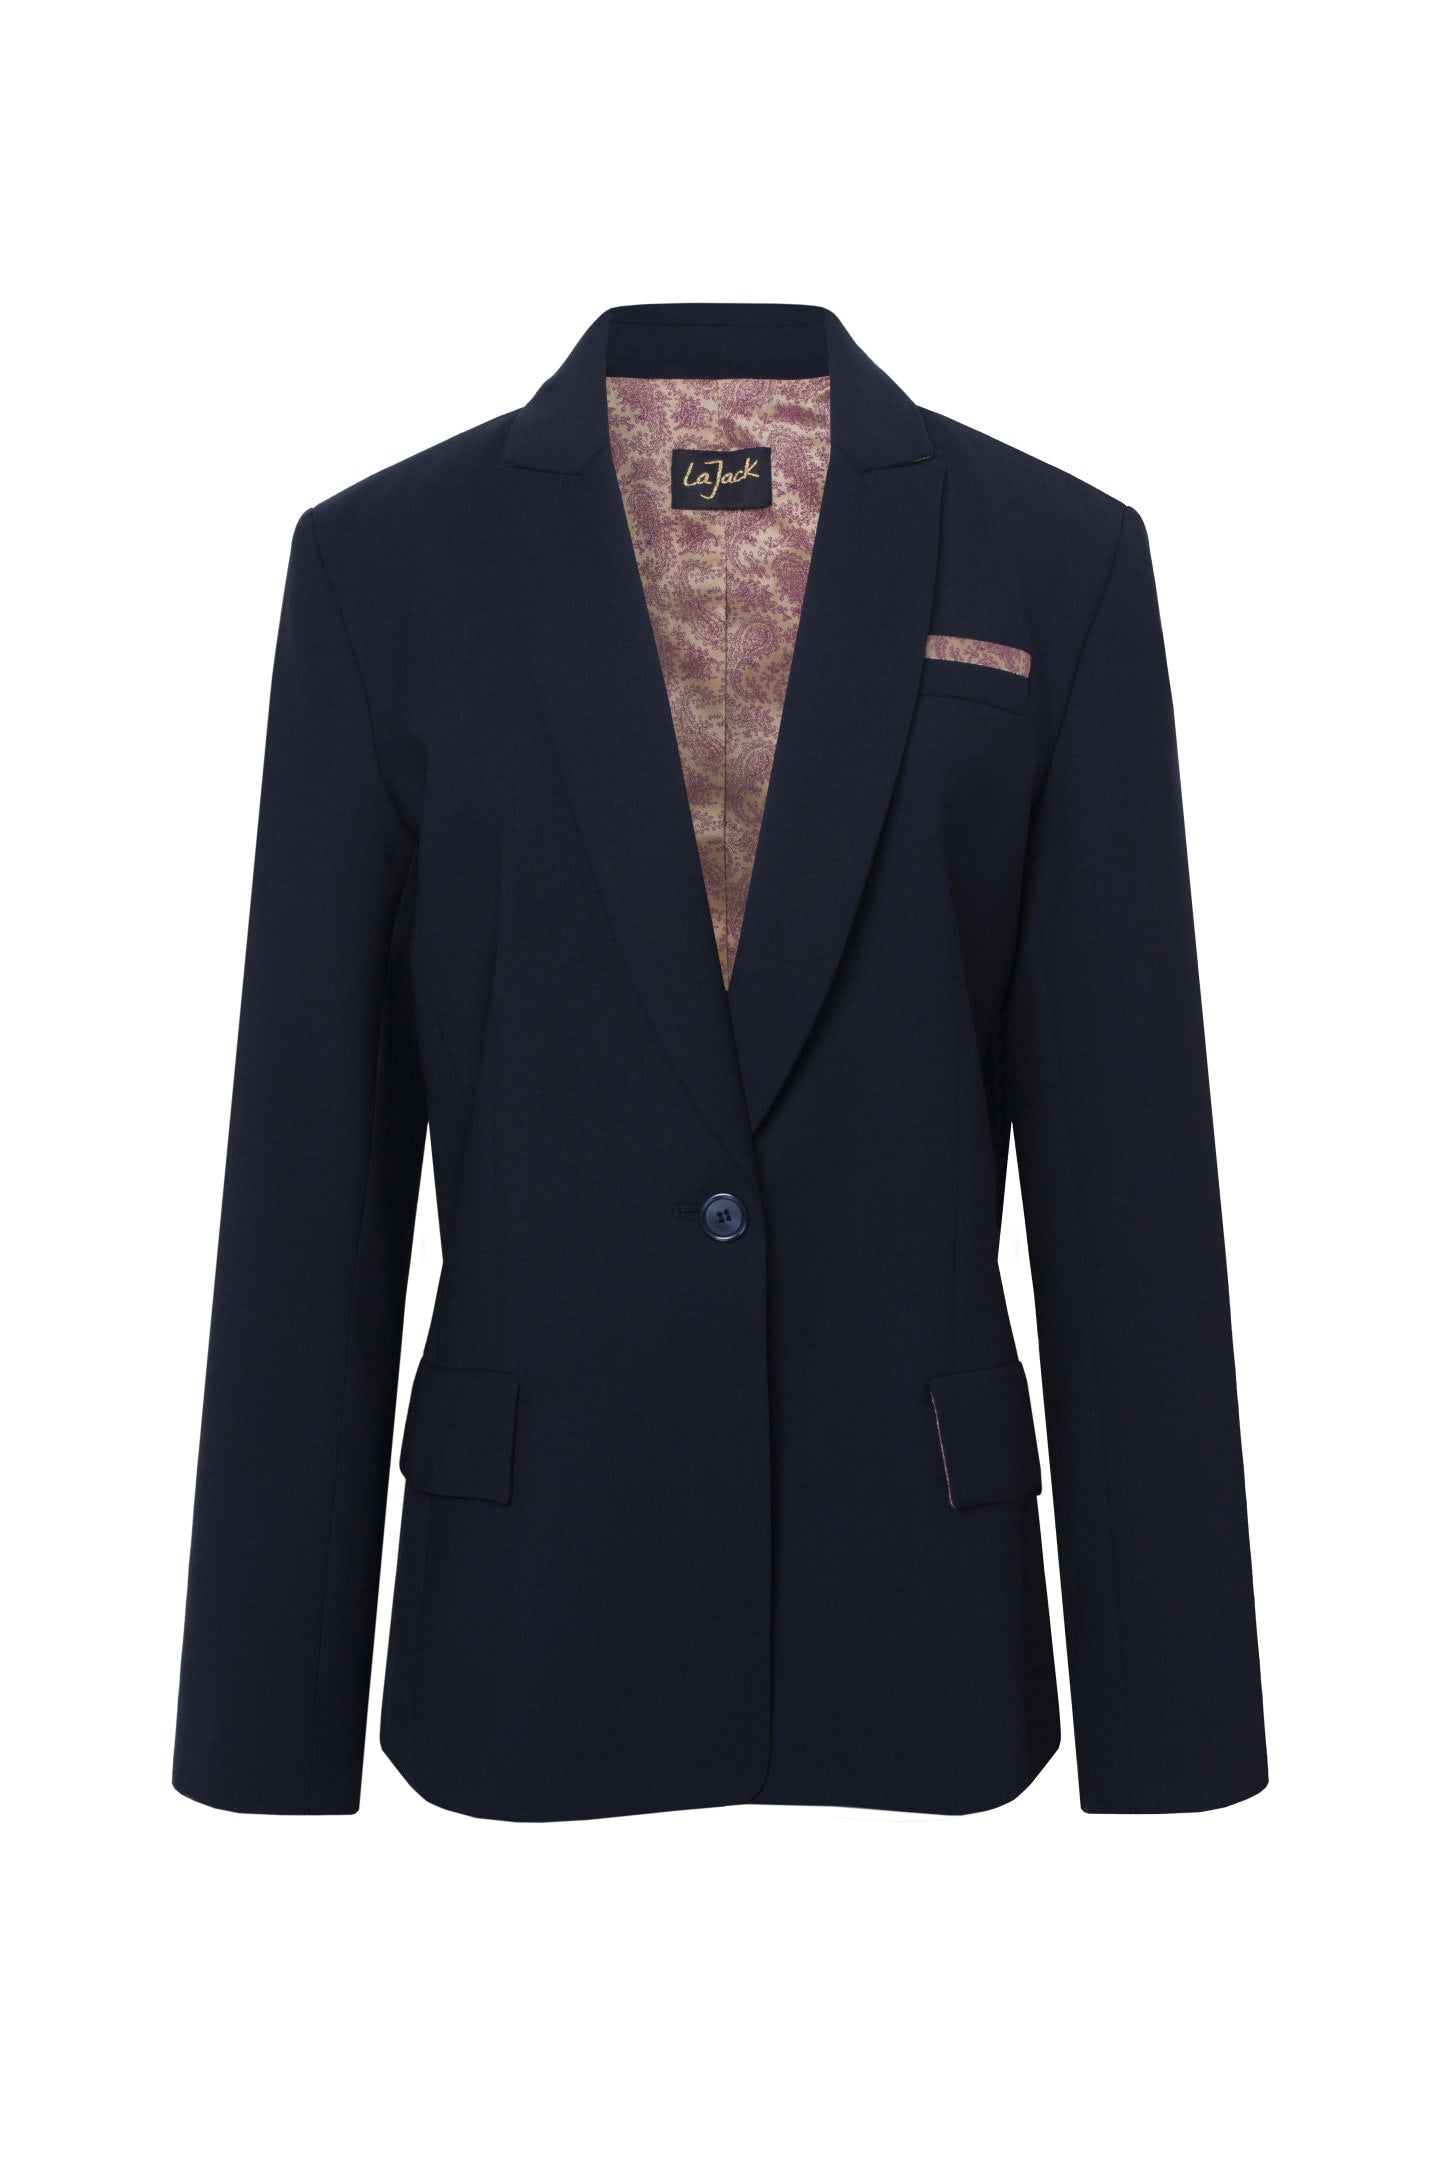 La Jackie Marine - Navy Wool Fitted Jacket Raspberry & Gold Cashmere Lining